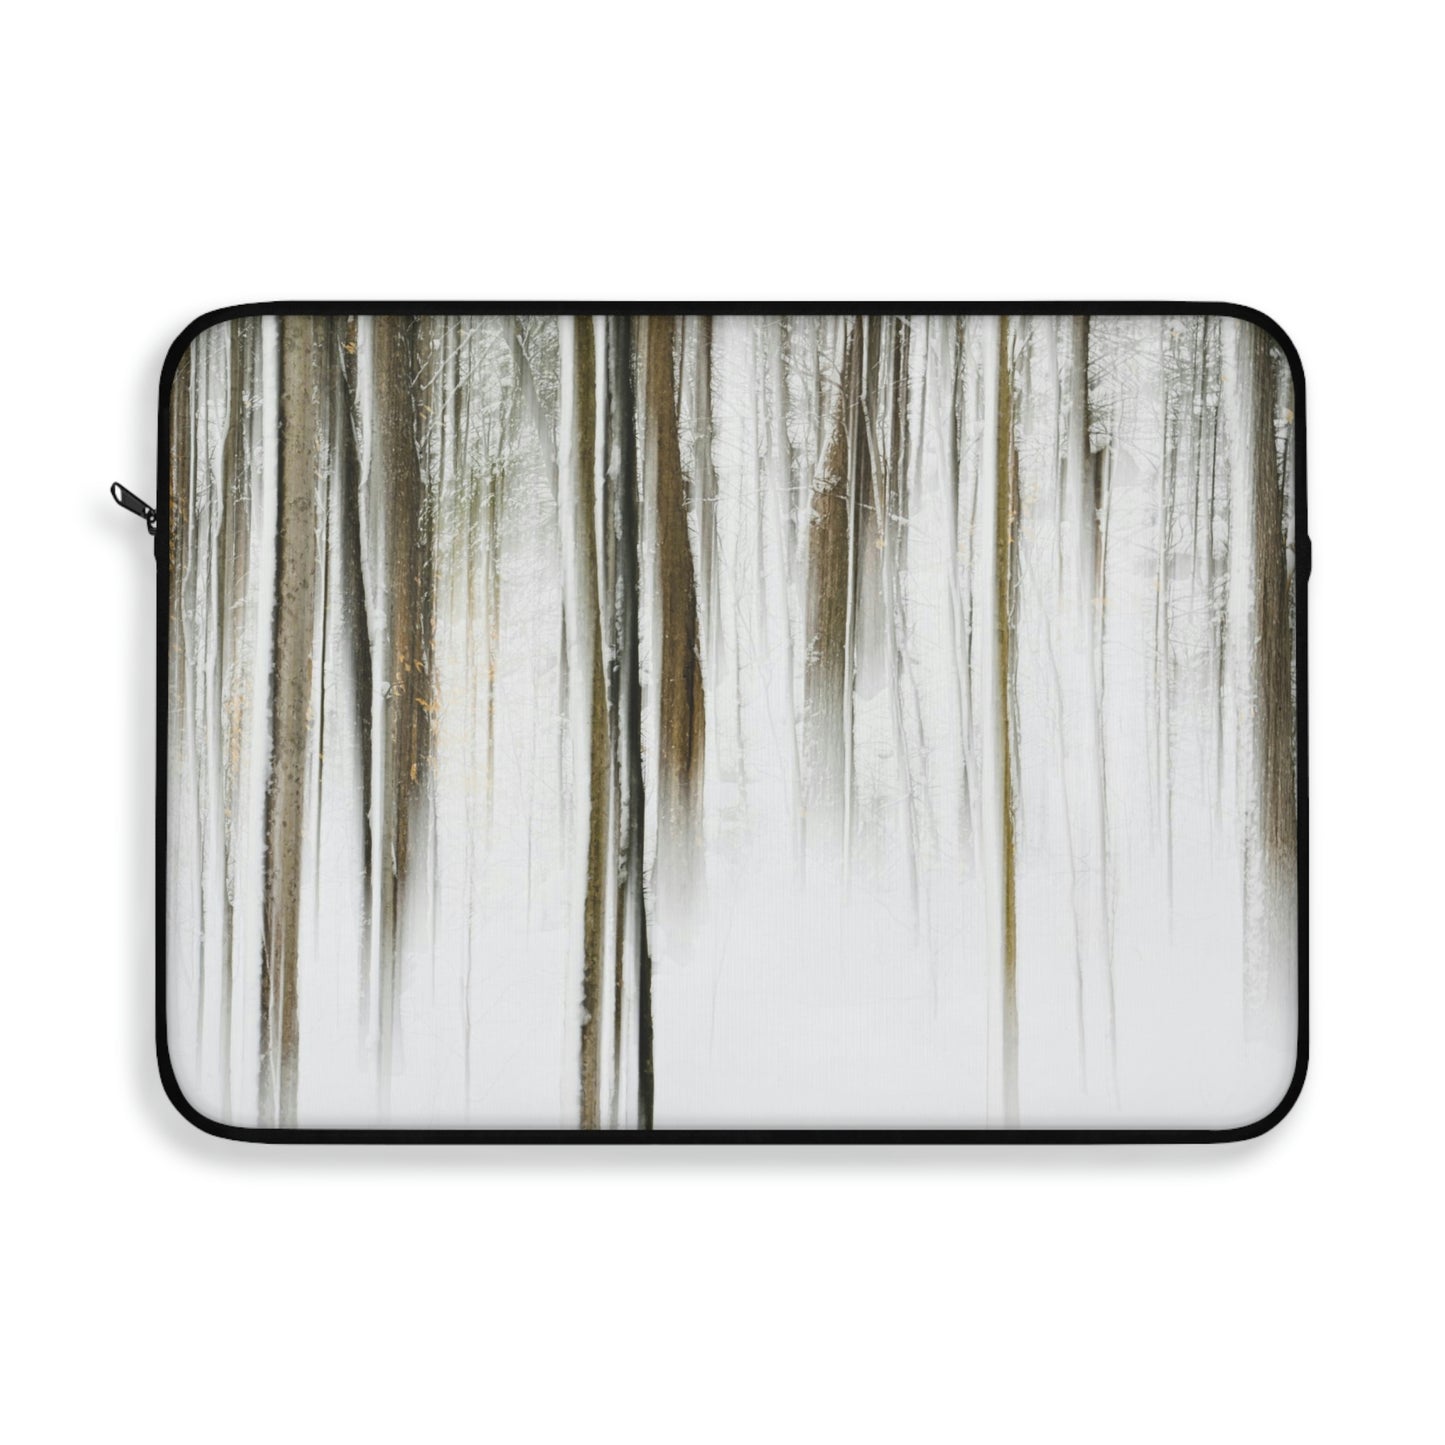 Laptop Sleeve - Abstract Winter Woods